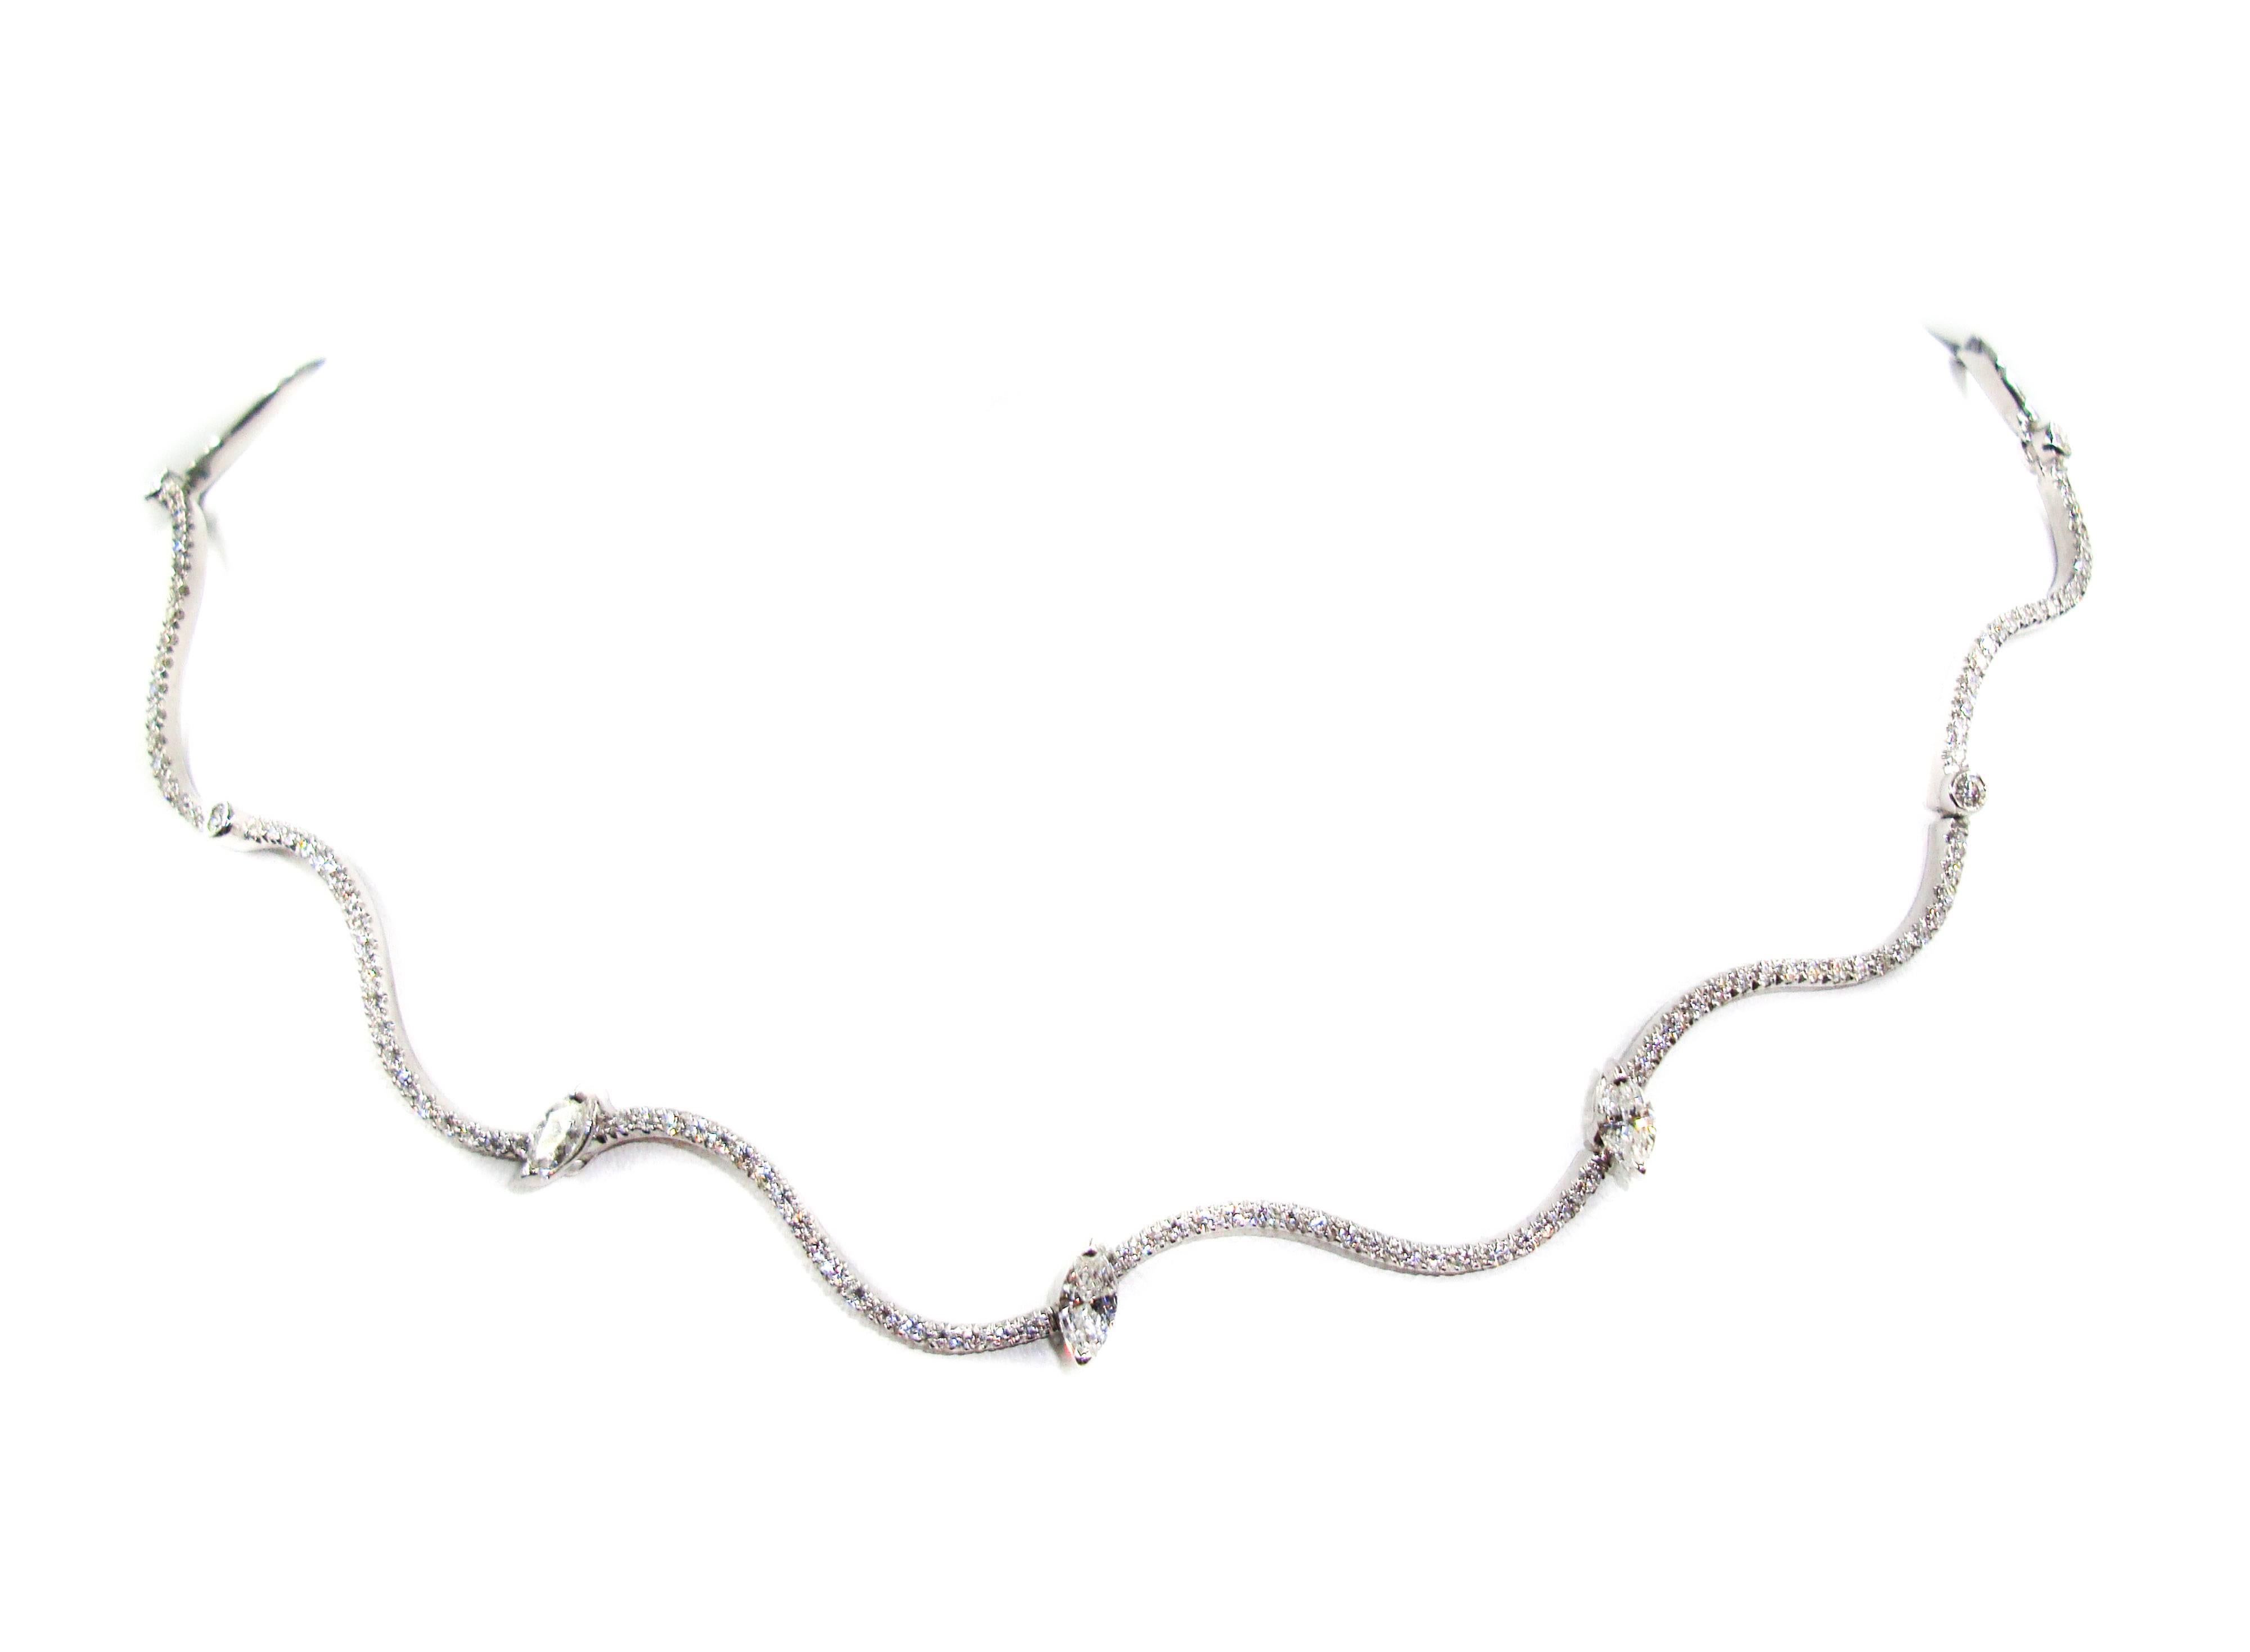 This fine Italian crafted diamond necklace gives a fresh turn to the classic Diamond Necklace set in 18k white gold, features a wavy line of diamonds for an exciting look. 
This necklace features 3 marquise shaped diamonds dispersed at the center,